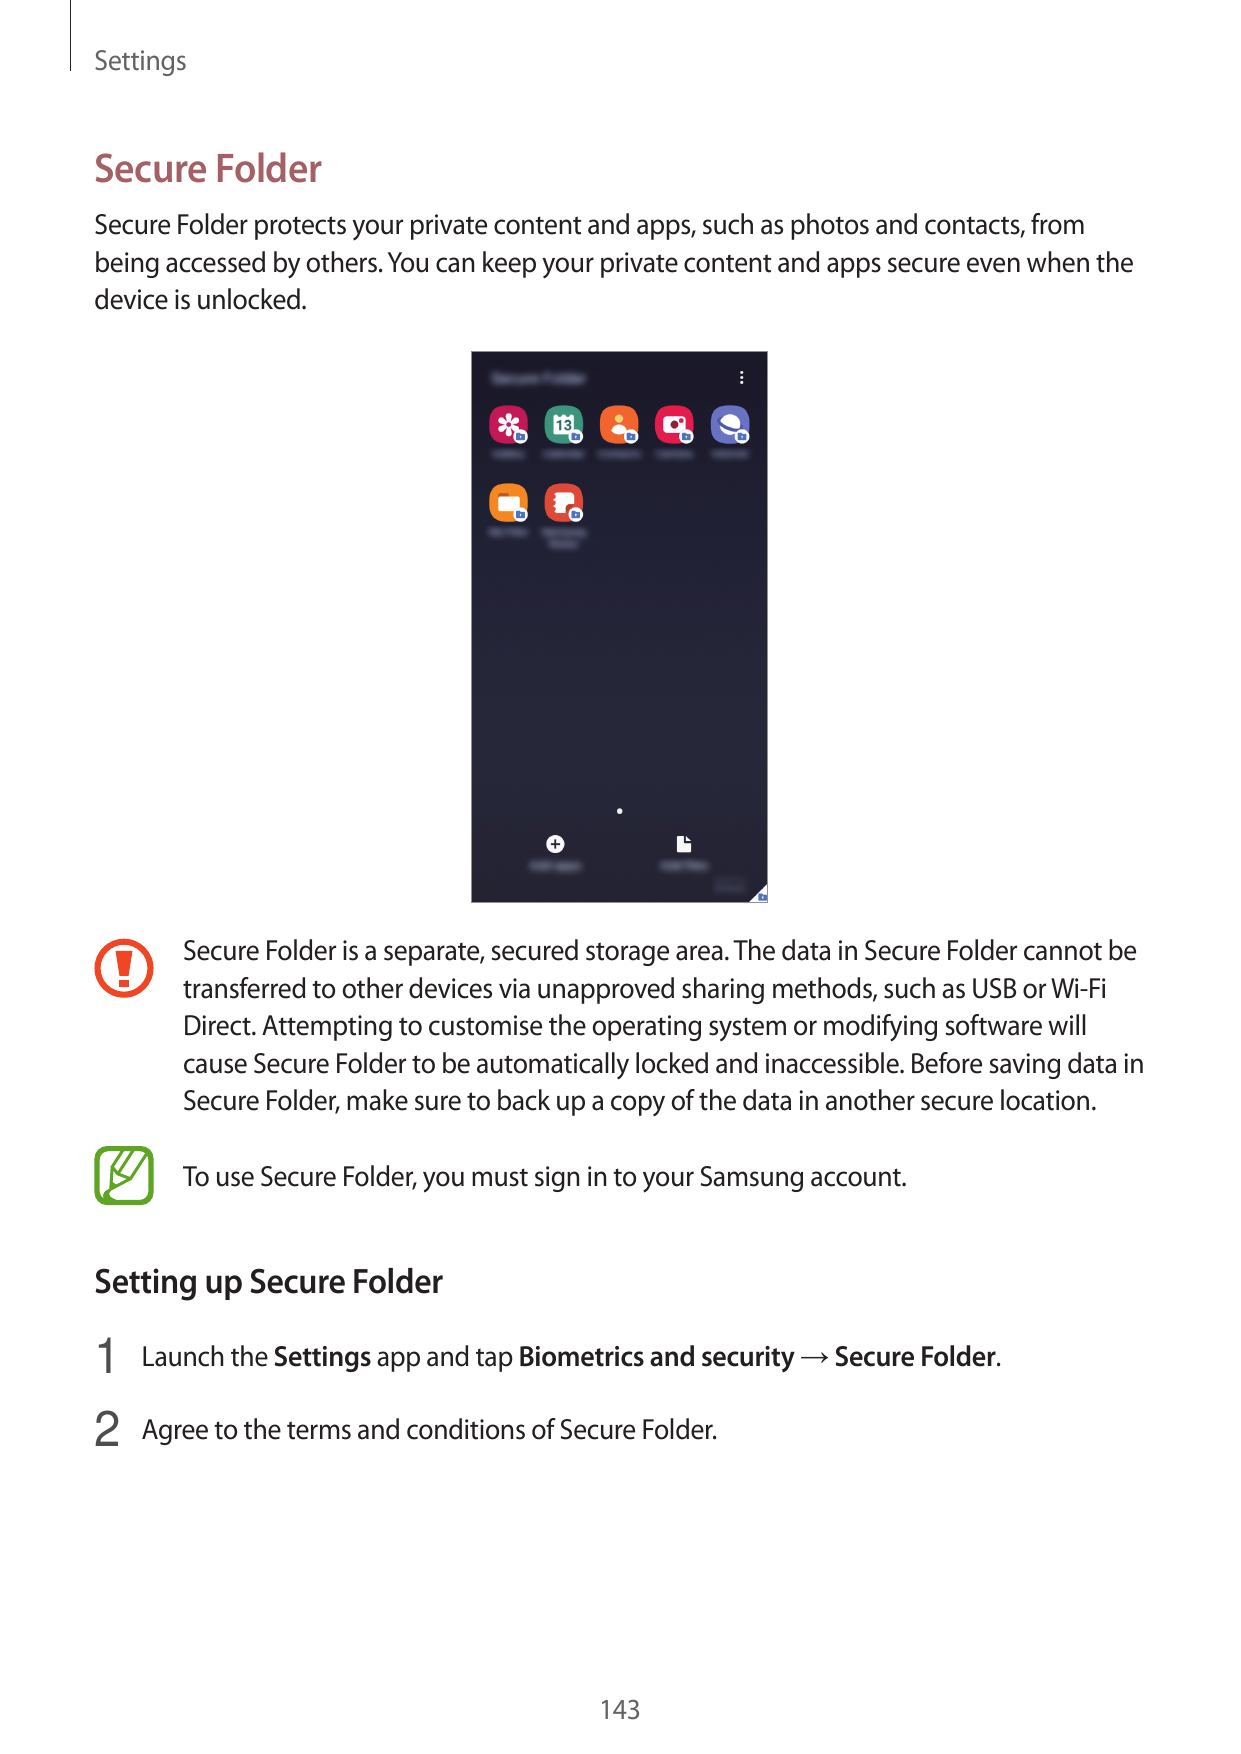 SettingsSecure FolderSecure Folder protects your private content and apps, such as photos and contacts, frombeing accessed by ot